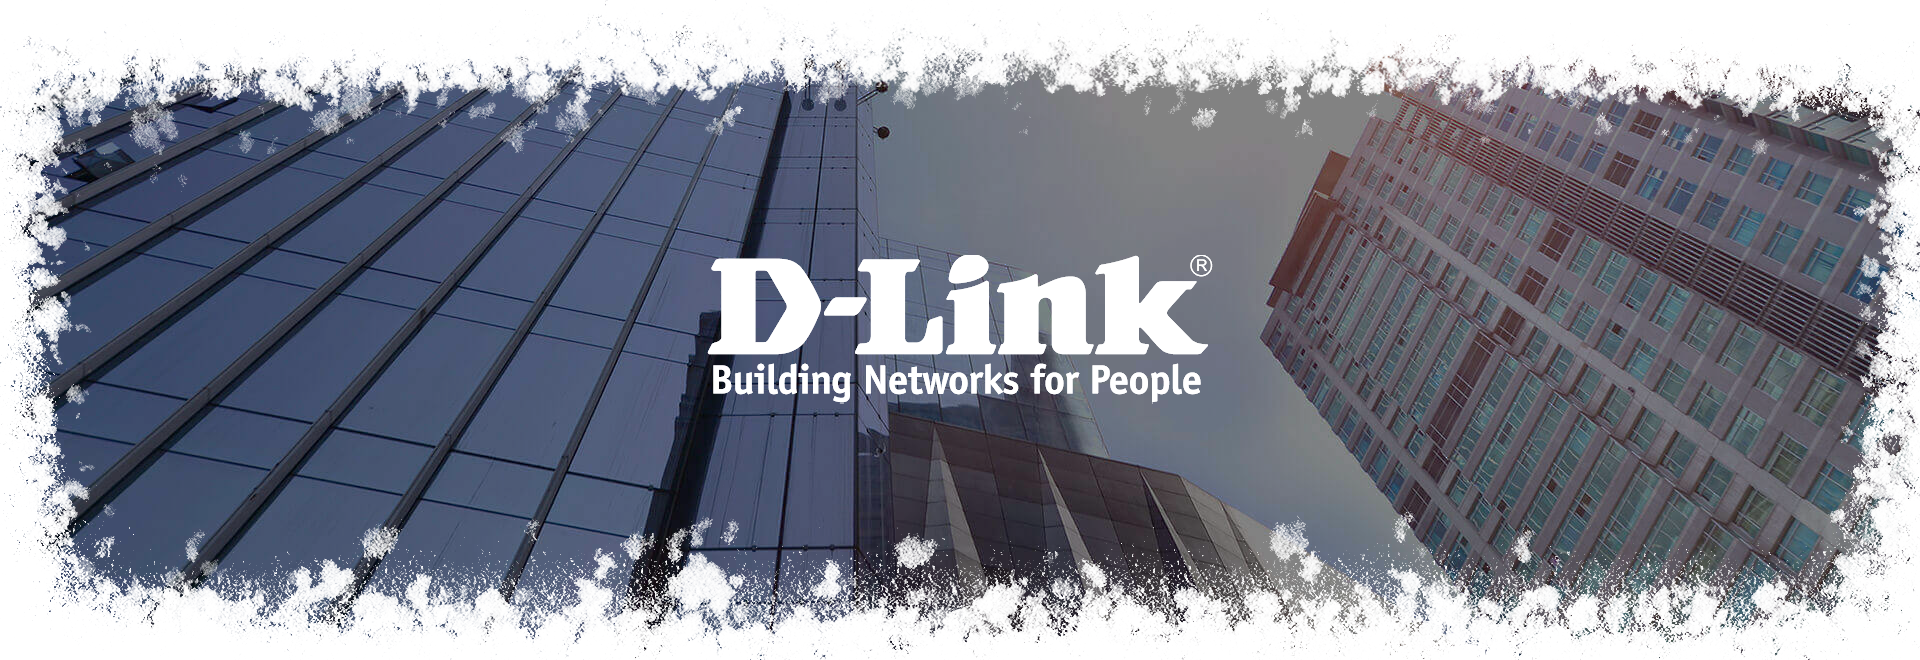 D-Link Company Introduction